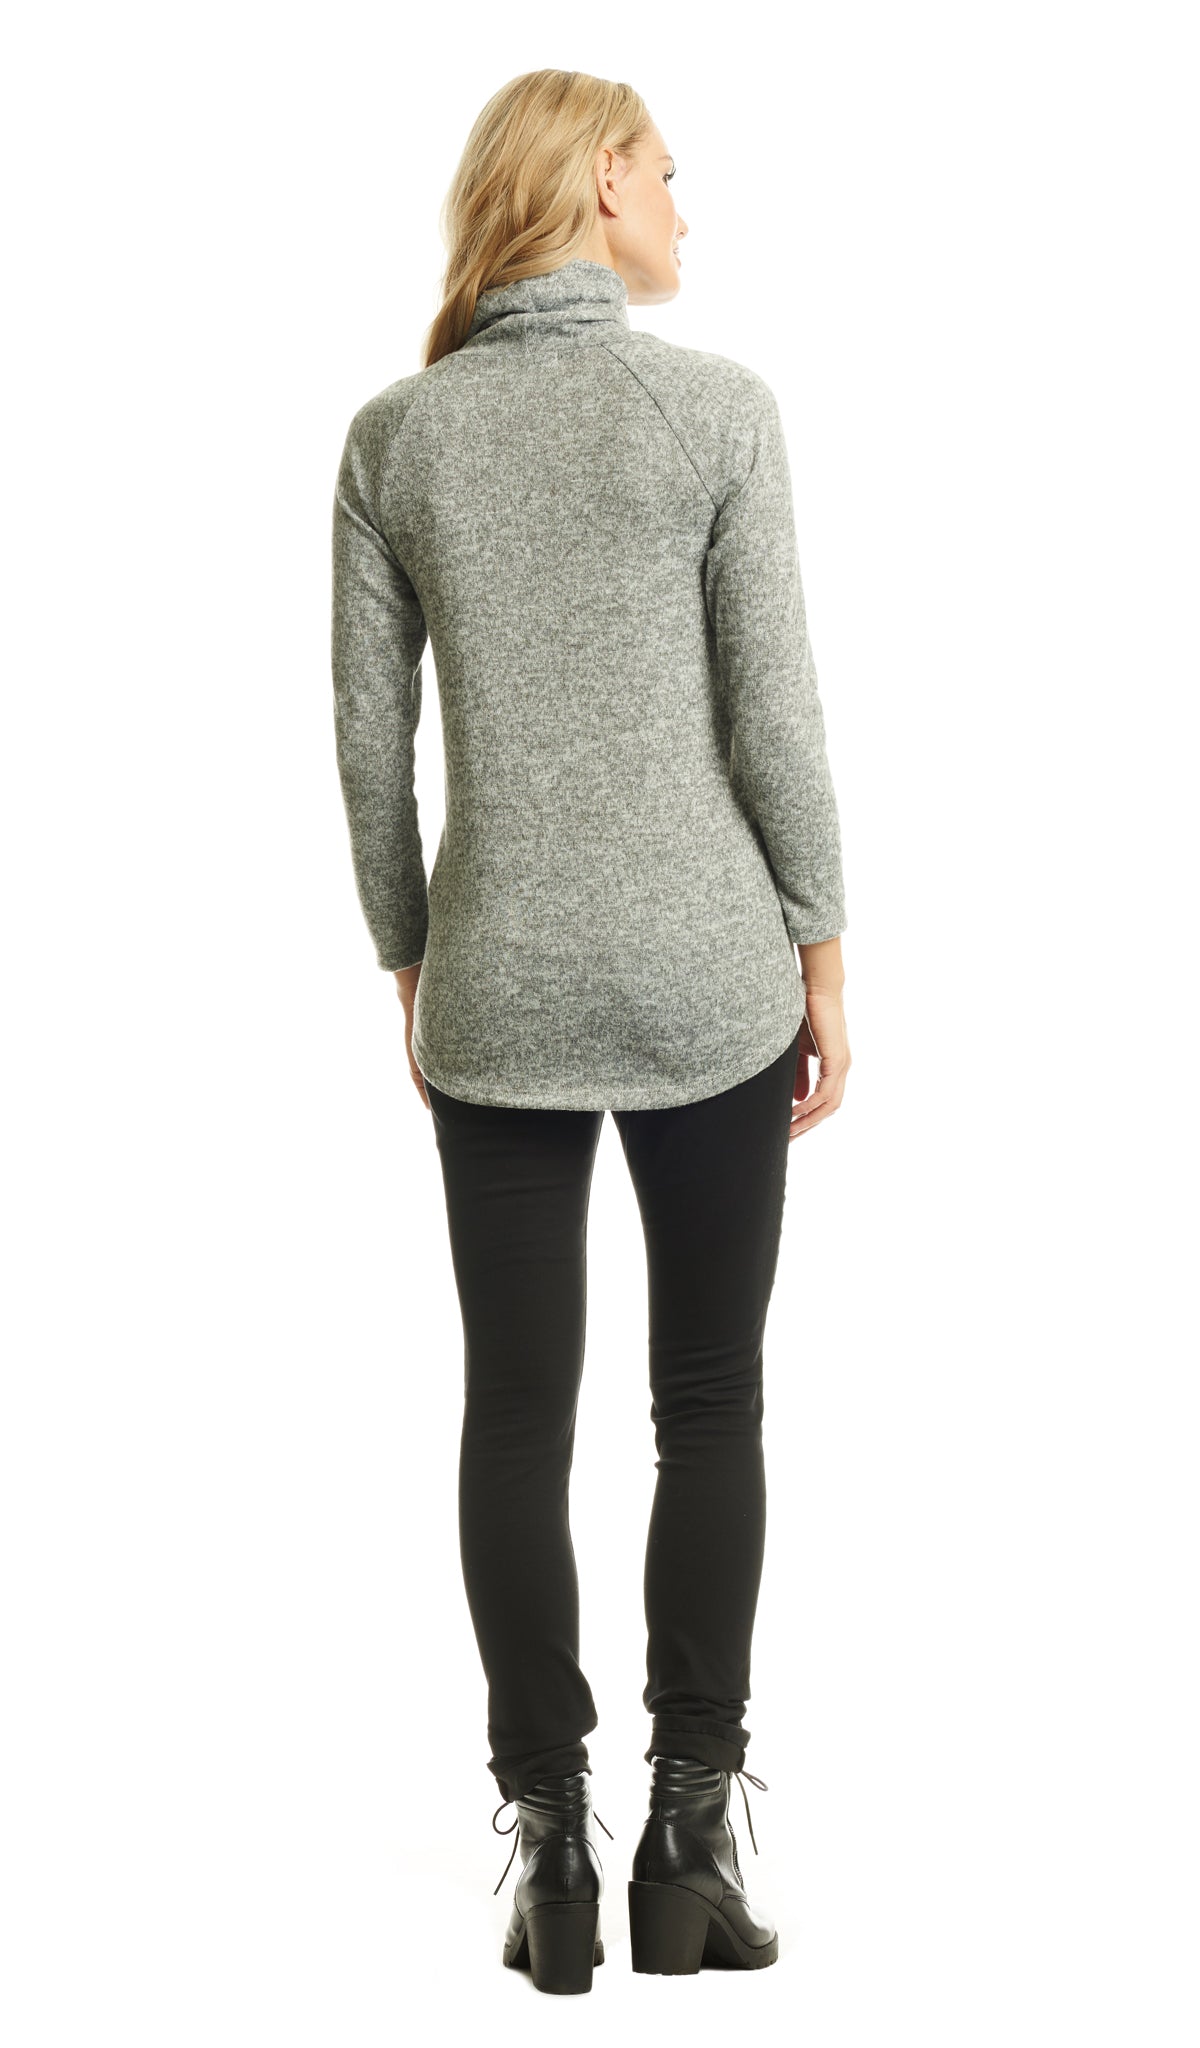 Heather Grey Teresa Sweater. Back shot of woman wearing Teresa Sweater with black pant and booties.